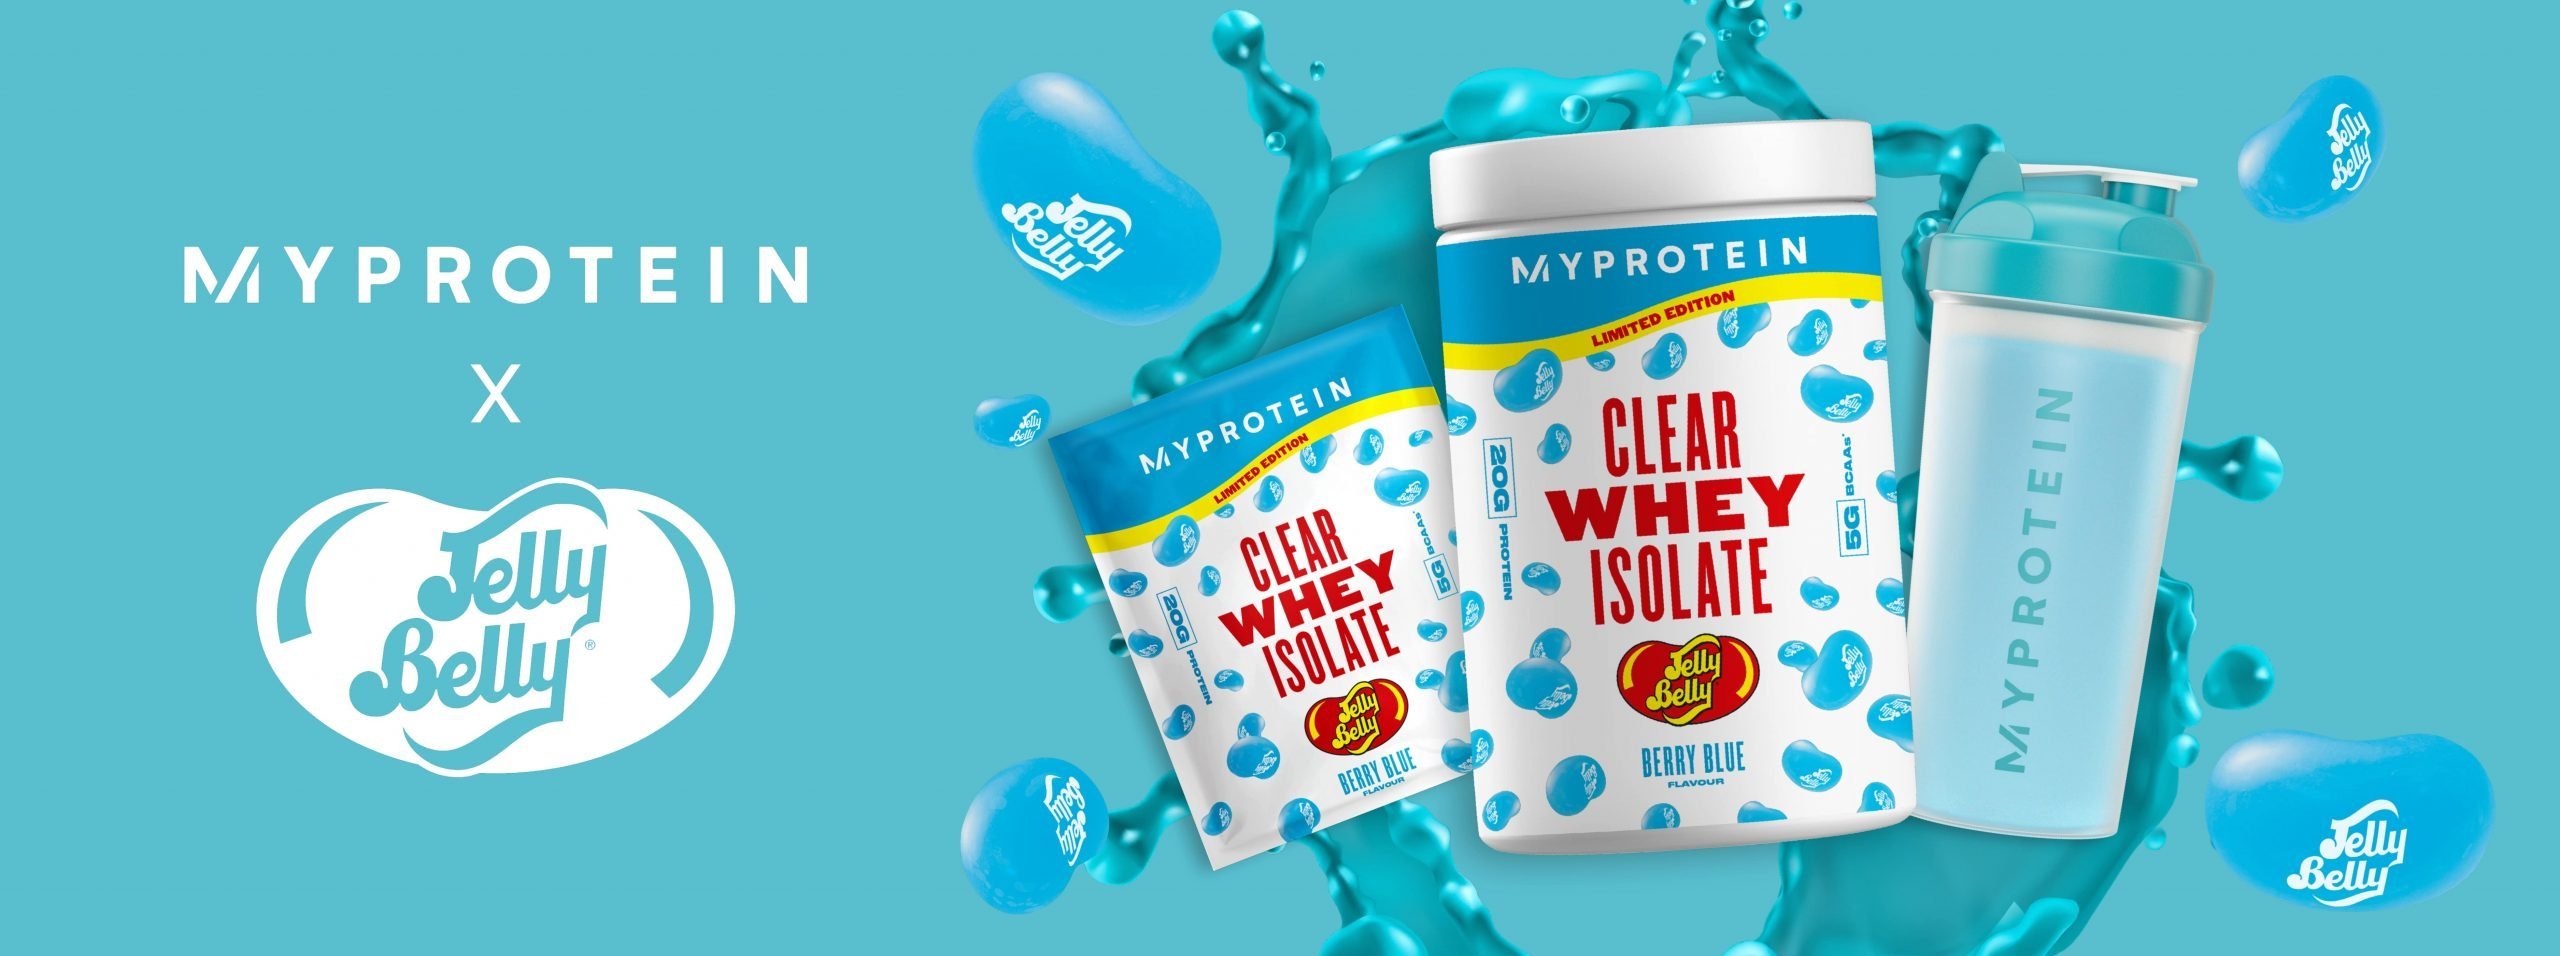 Jelly Belly X Clear Whey | Get To Know 5 New Juicy Flavours